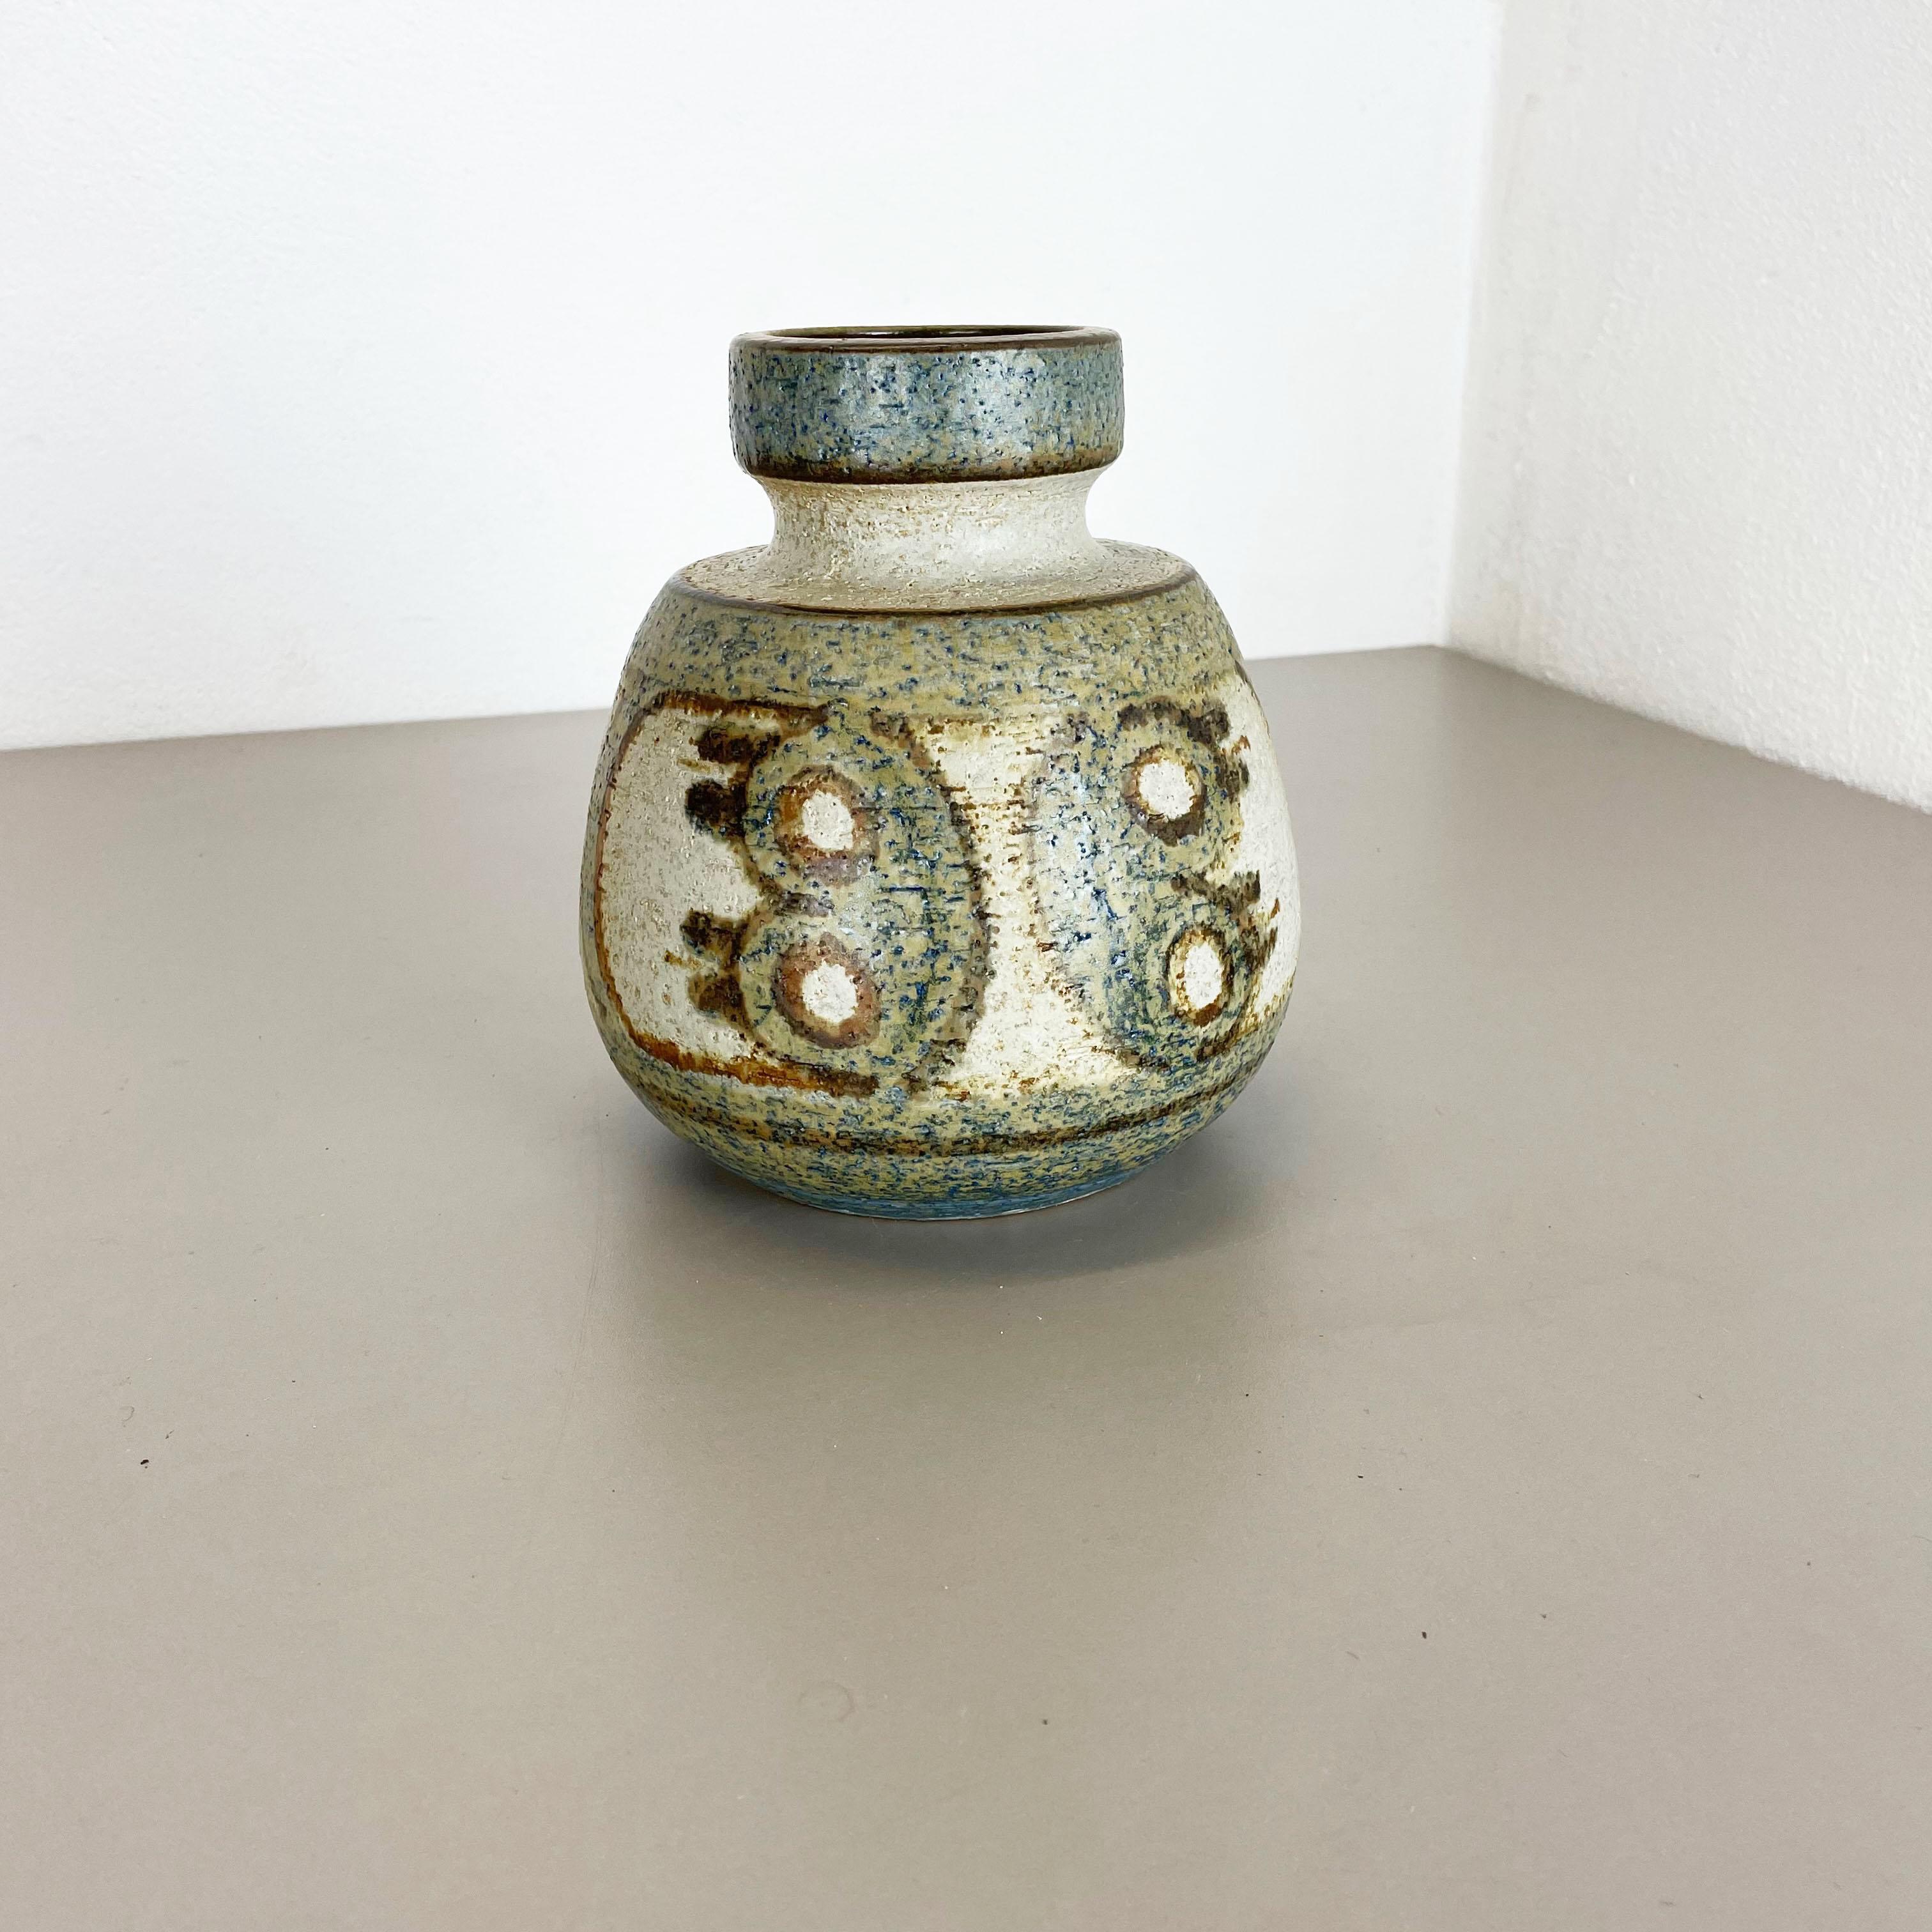 Article:

Ceramic vase object


Producer:

SOHOLM, Denmark




Decade:

1970s





This original vintage ceramic vase was designed and produced by SOHOLM in Denmark in the 1970s. It is made of solid pottery and has a nice